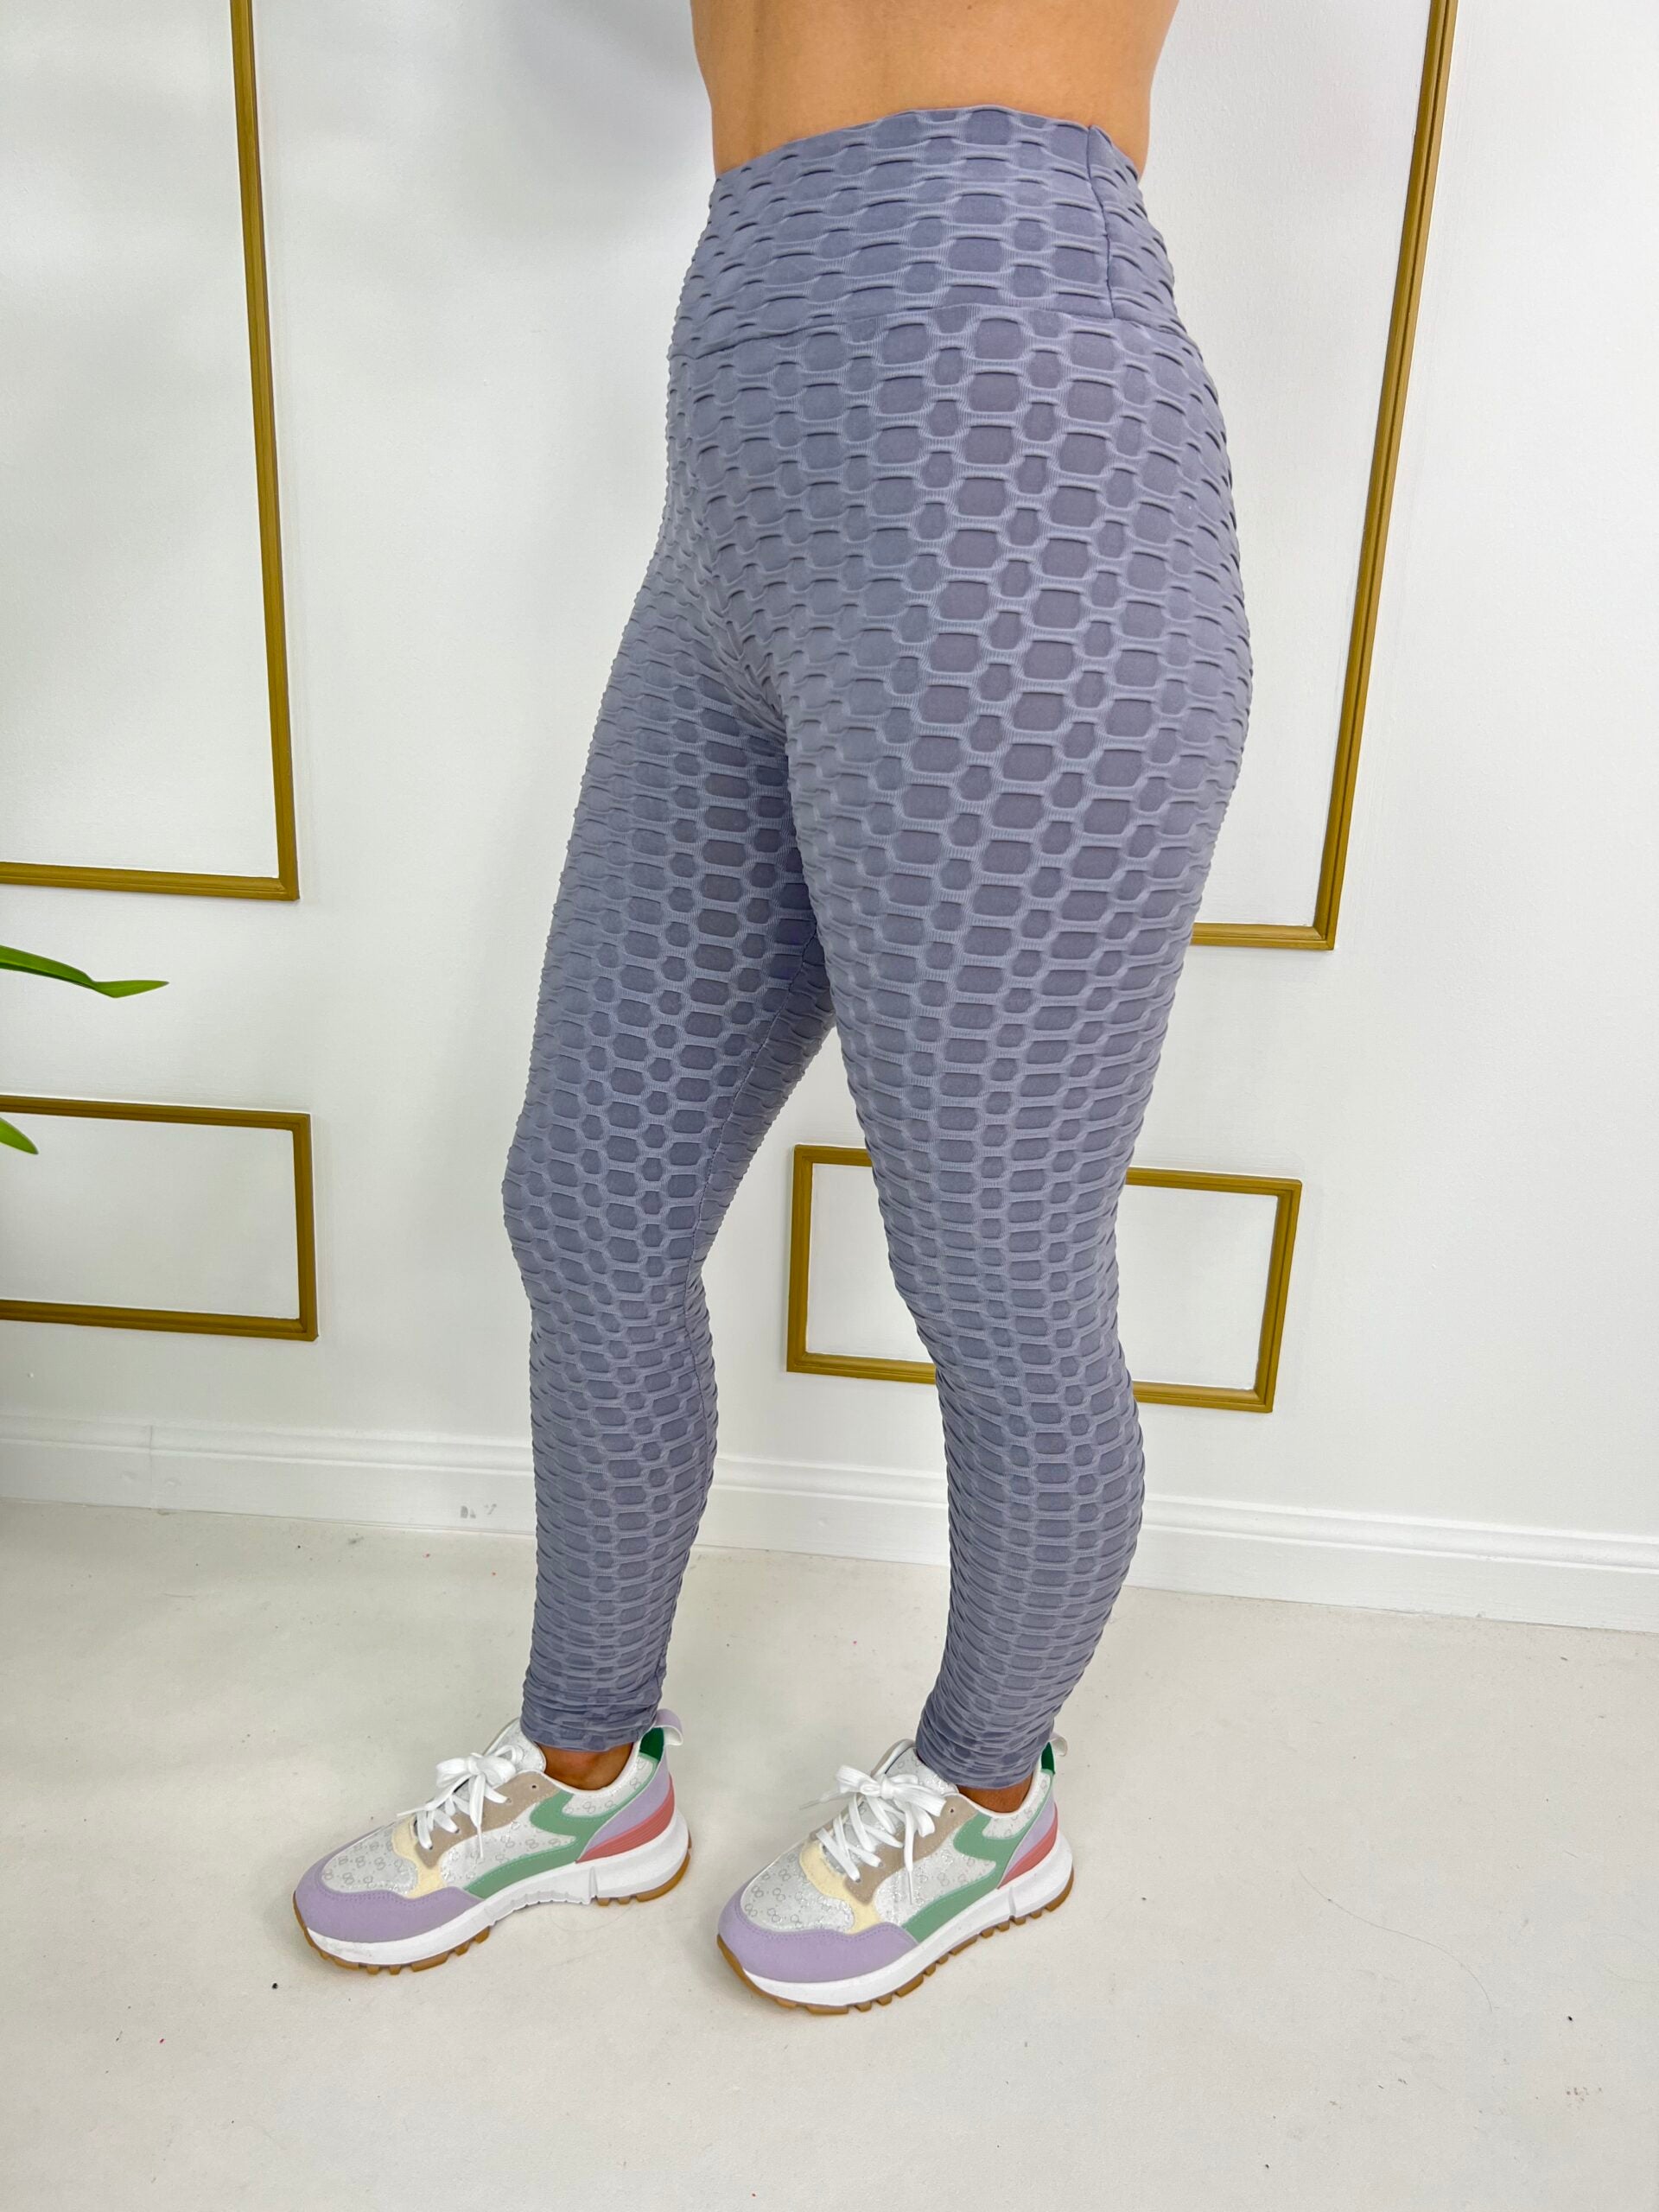 Stay Active in Style with the Amalia Waffle Leggings